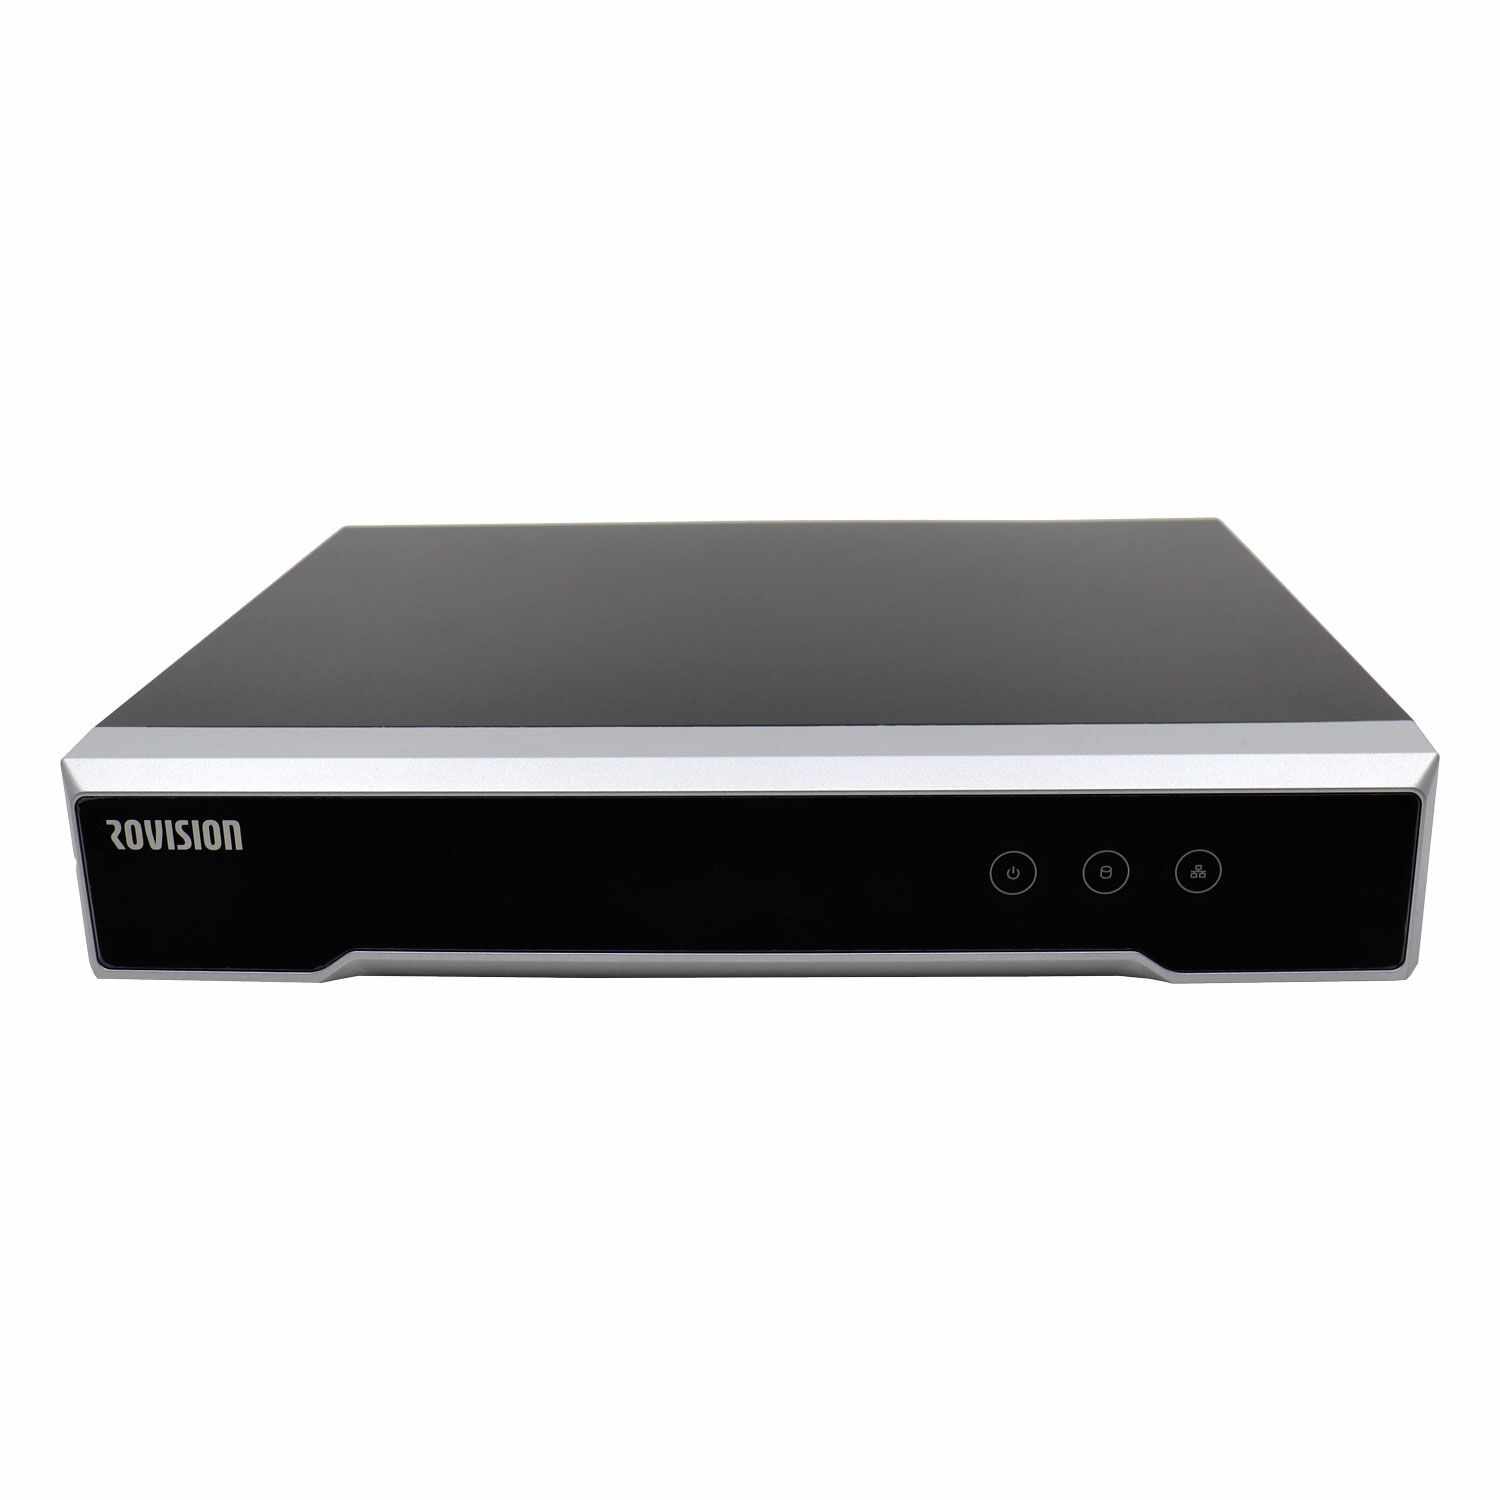 NVR 4 Canale POE Rovision, H265+,Full HD ROV7104NI-Q1/4P/M/1T + Cadou Hard Disk WD 1TB